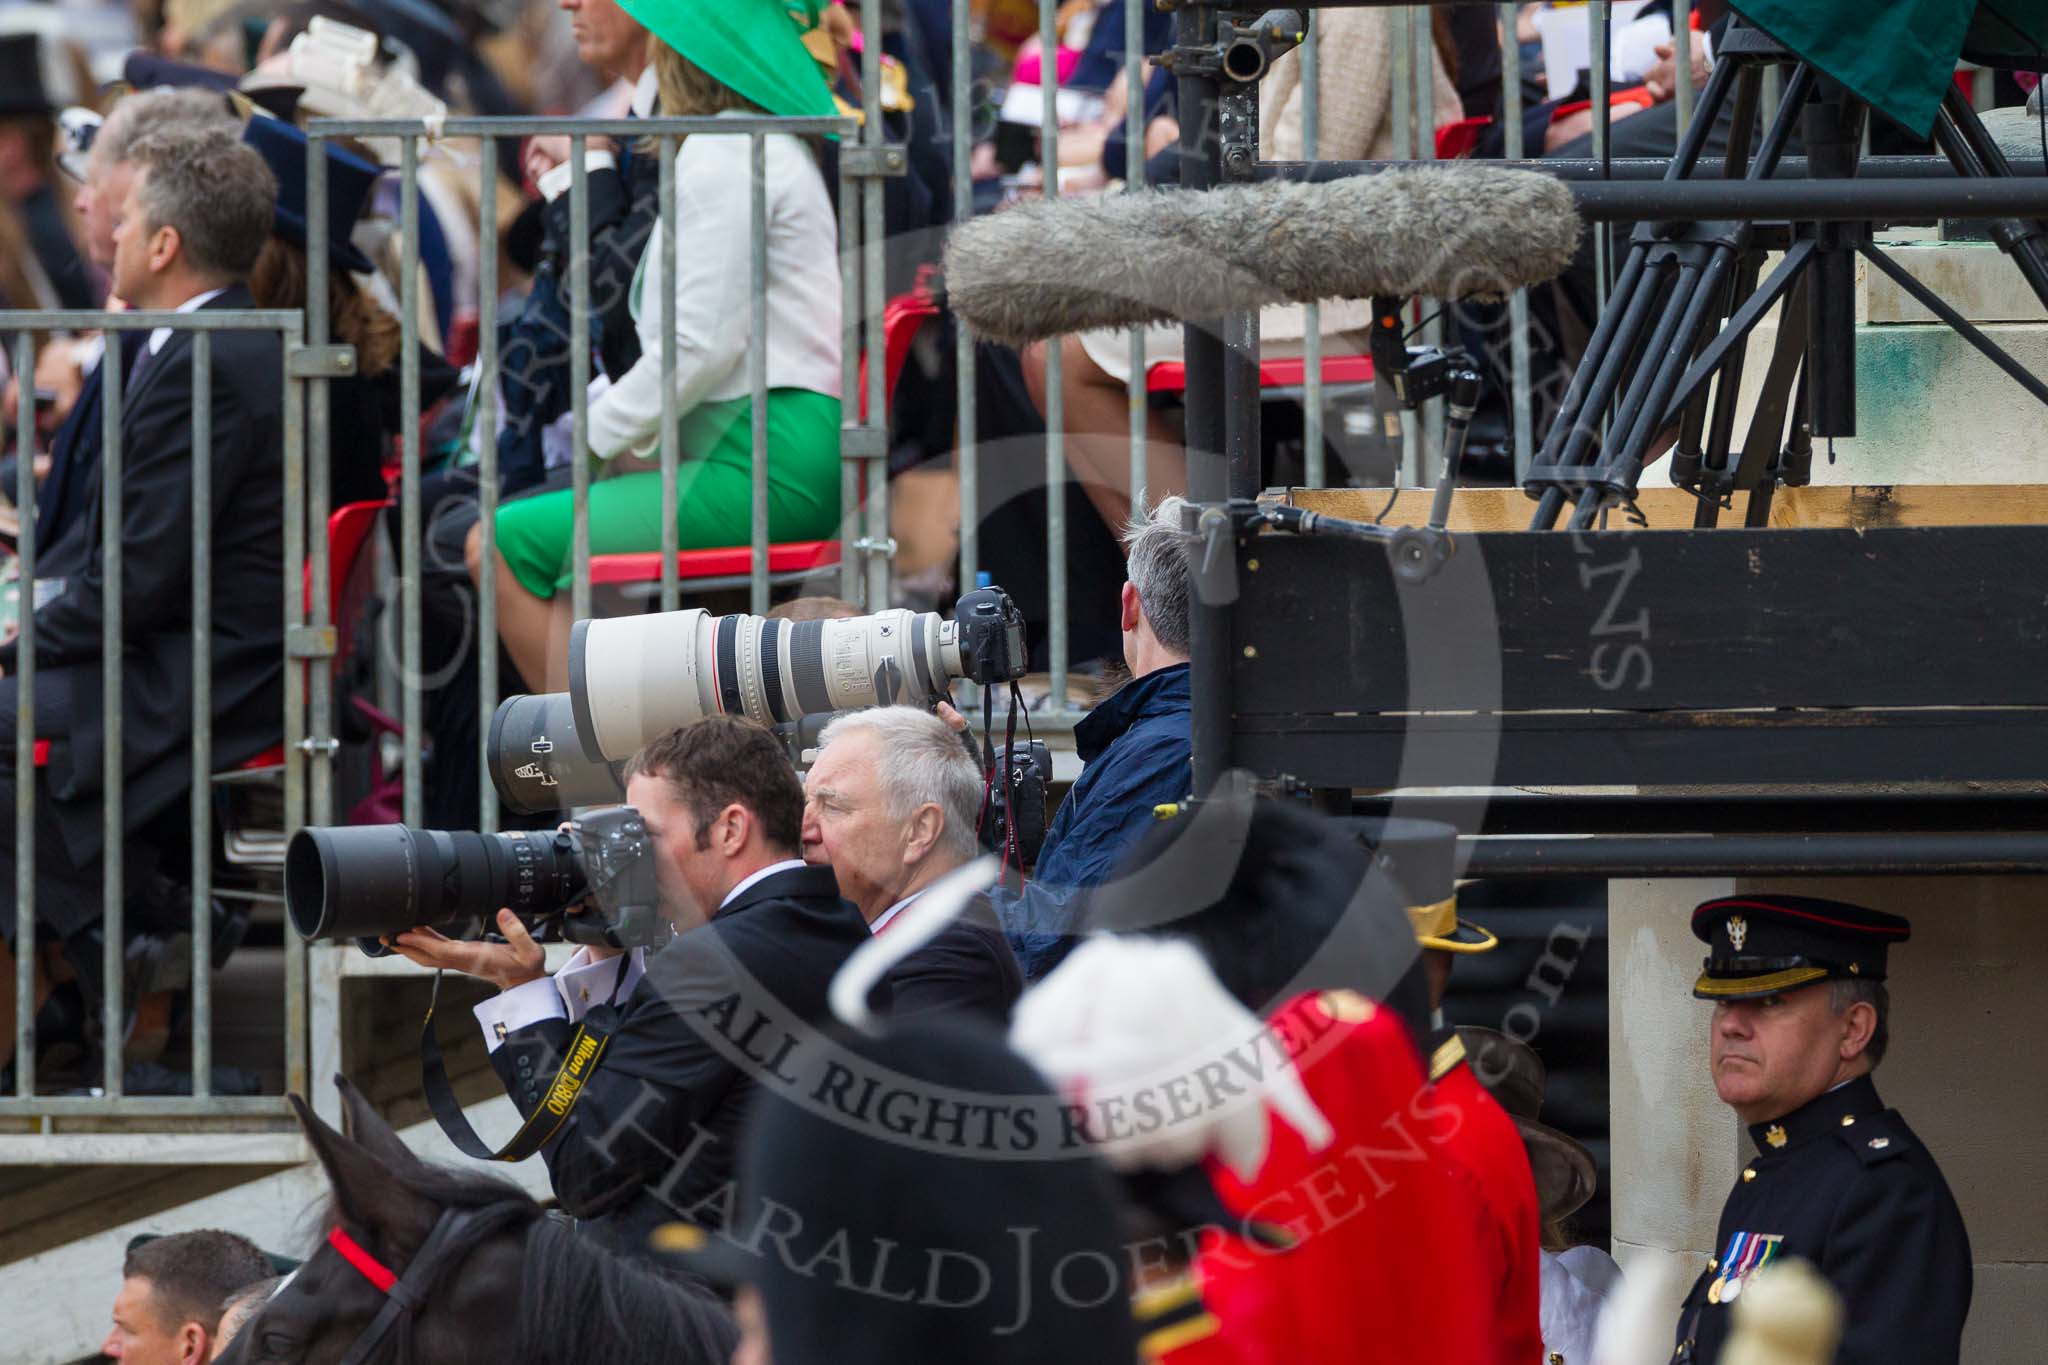 Trooping the Colour 2015. Image #401, 13 June 2015 11:23 Horse Guards Parade, London, UK